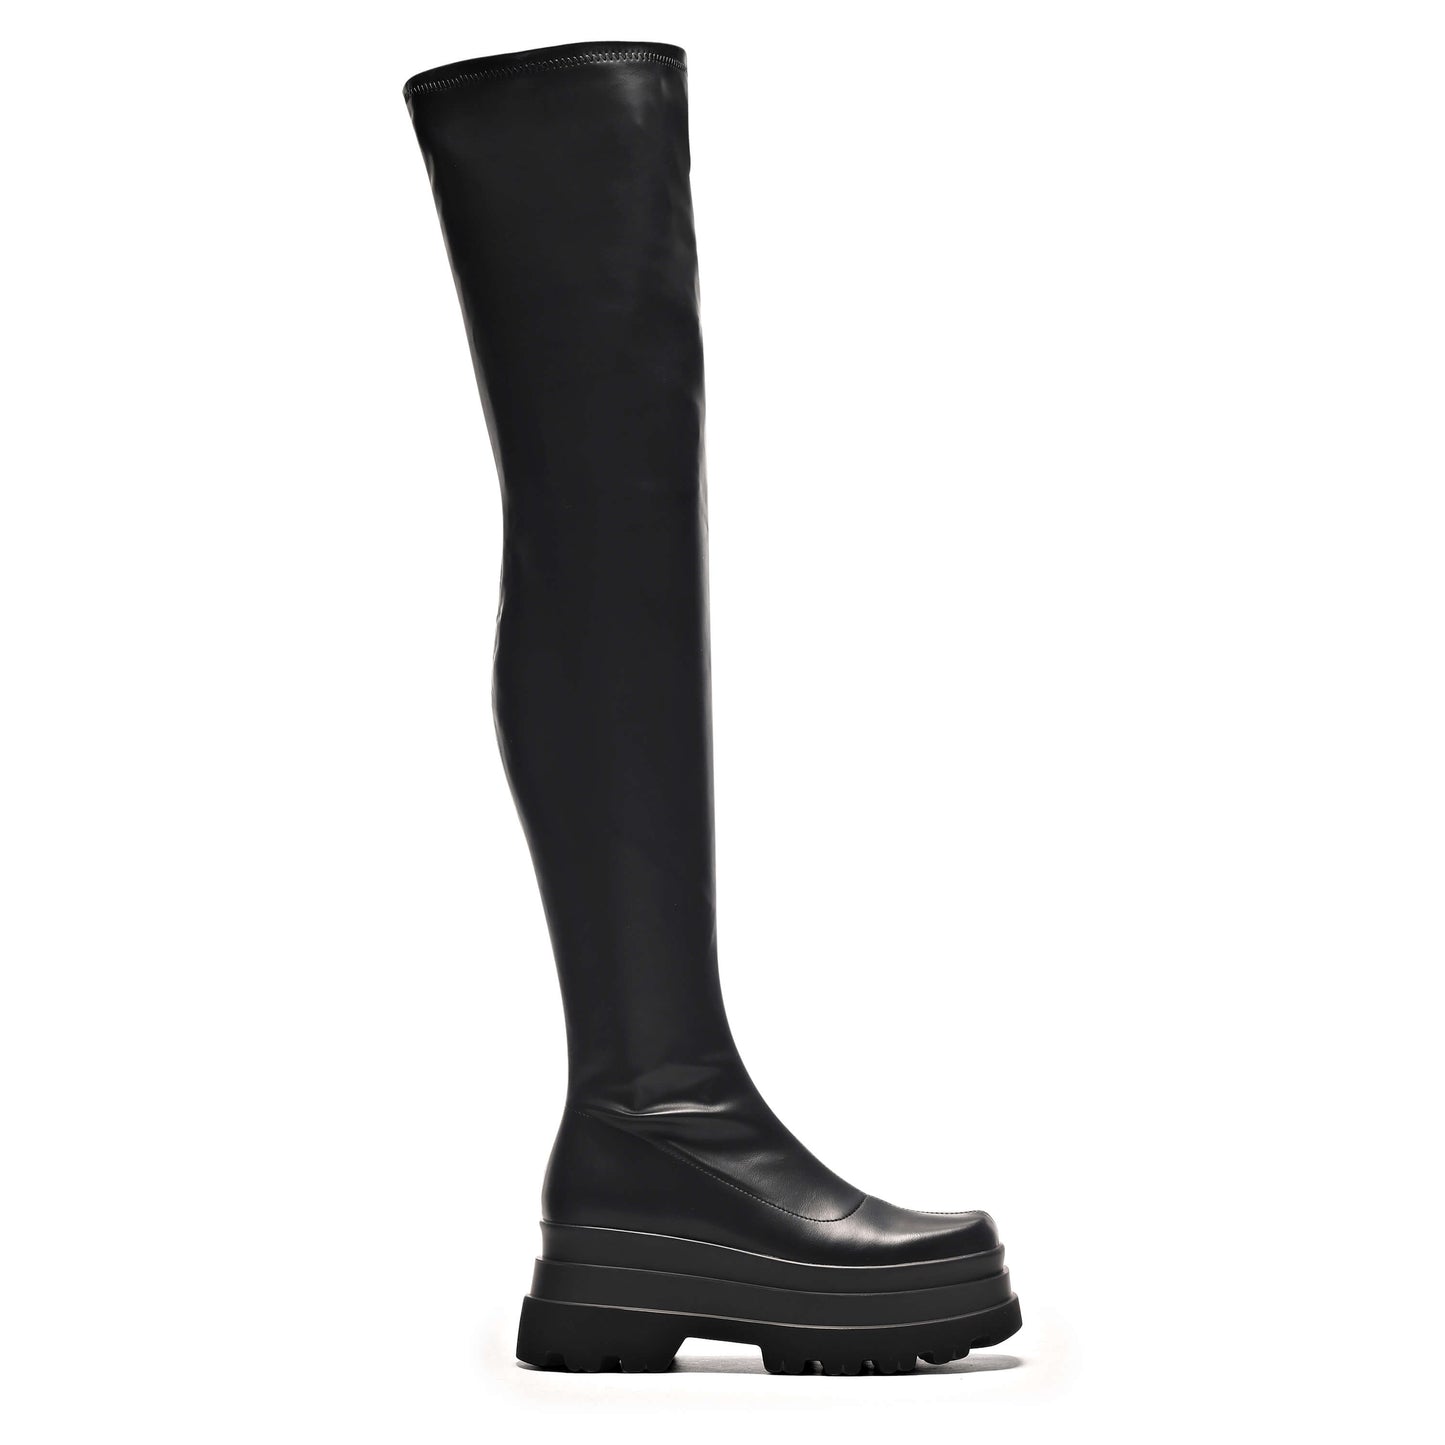 The Elevation Plus Size Thigh High Boots - Long Boots - KOI Footwear - Black - Side View